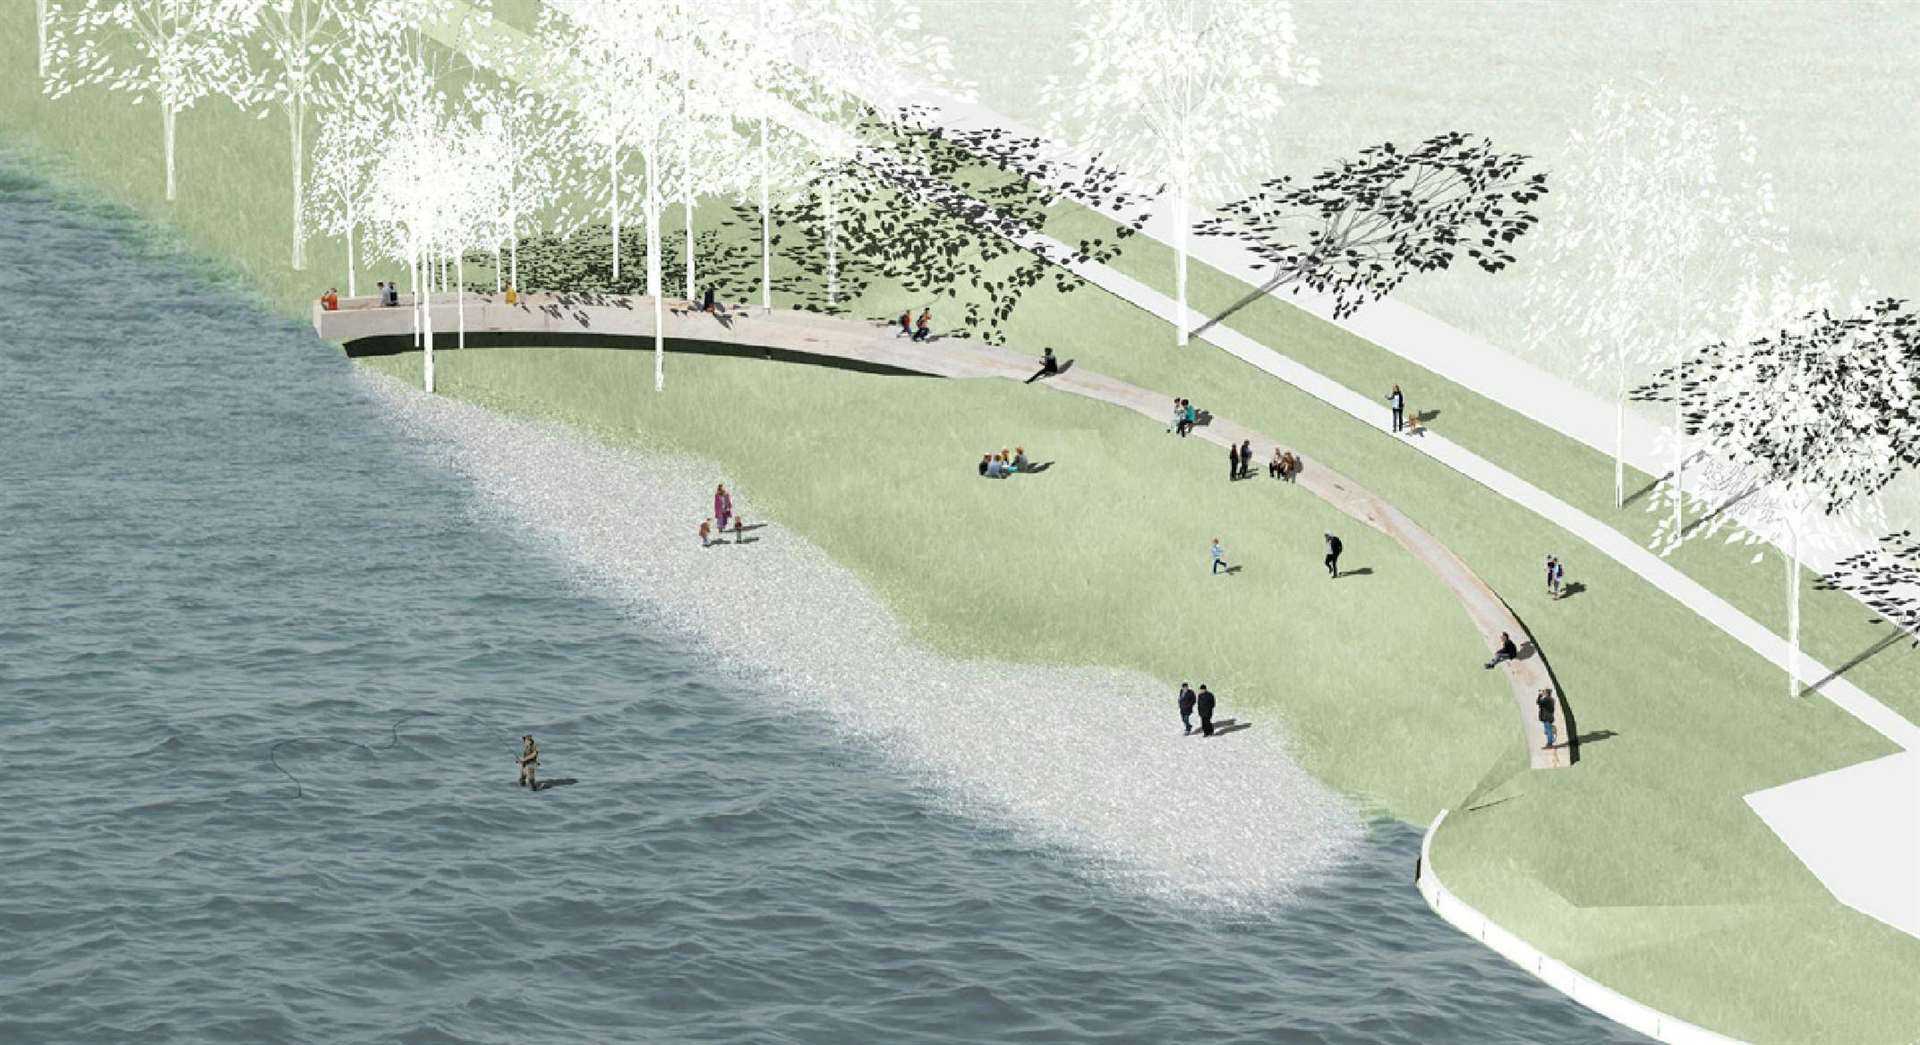 An artist's impression of the My Ness section planned for the Ness Islands bank.